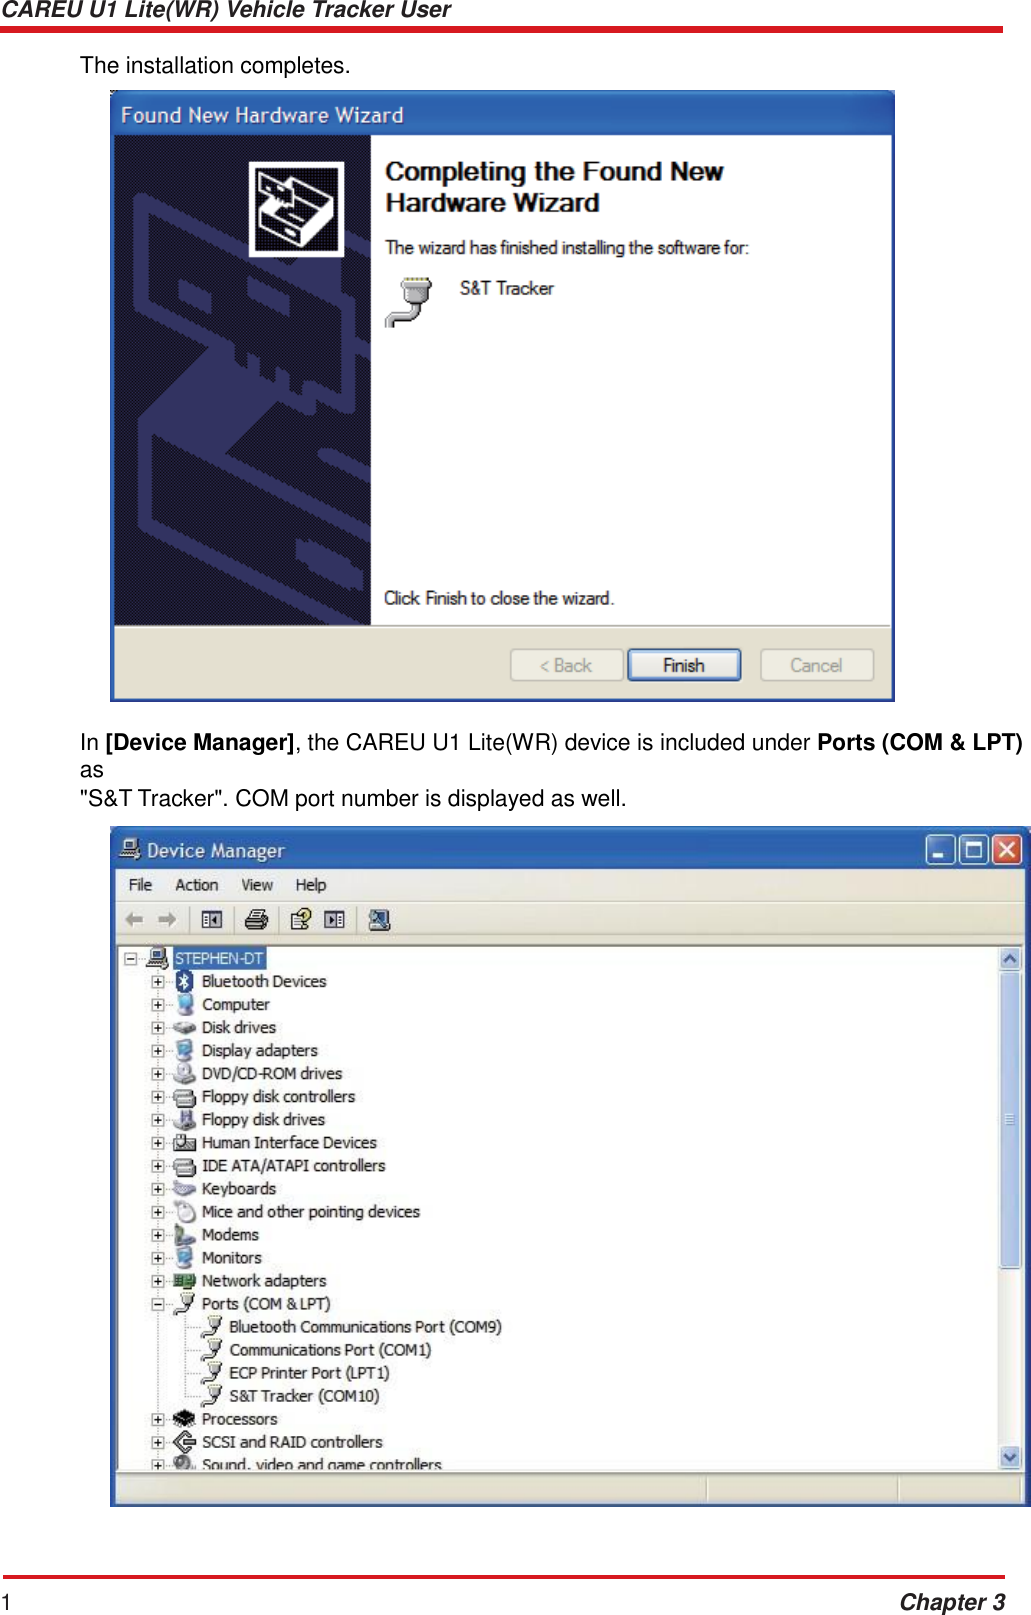 CAREU U1 Lite(WR) Vehicle Tracker User Guide 12 Chapter 3    The installation completes.    In [Device Manager], the CAREU U1 Lite(WR) device is included under Ports (COM &amp; LPT) as &quot;S&amp;T Tracker&quot;. COM port number is displayed as well.   